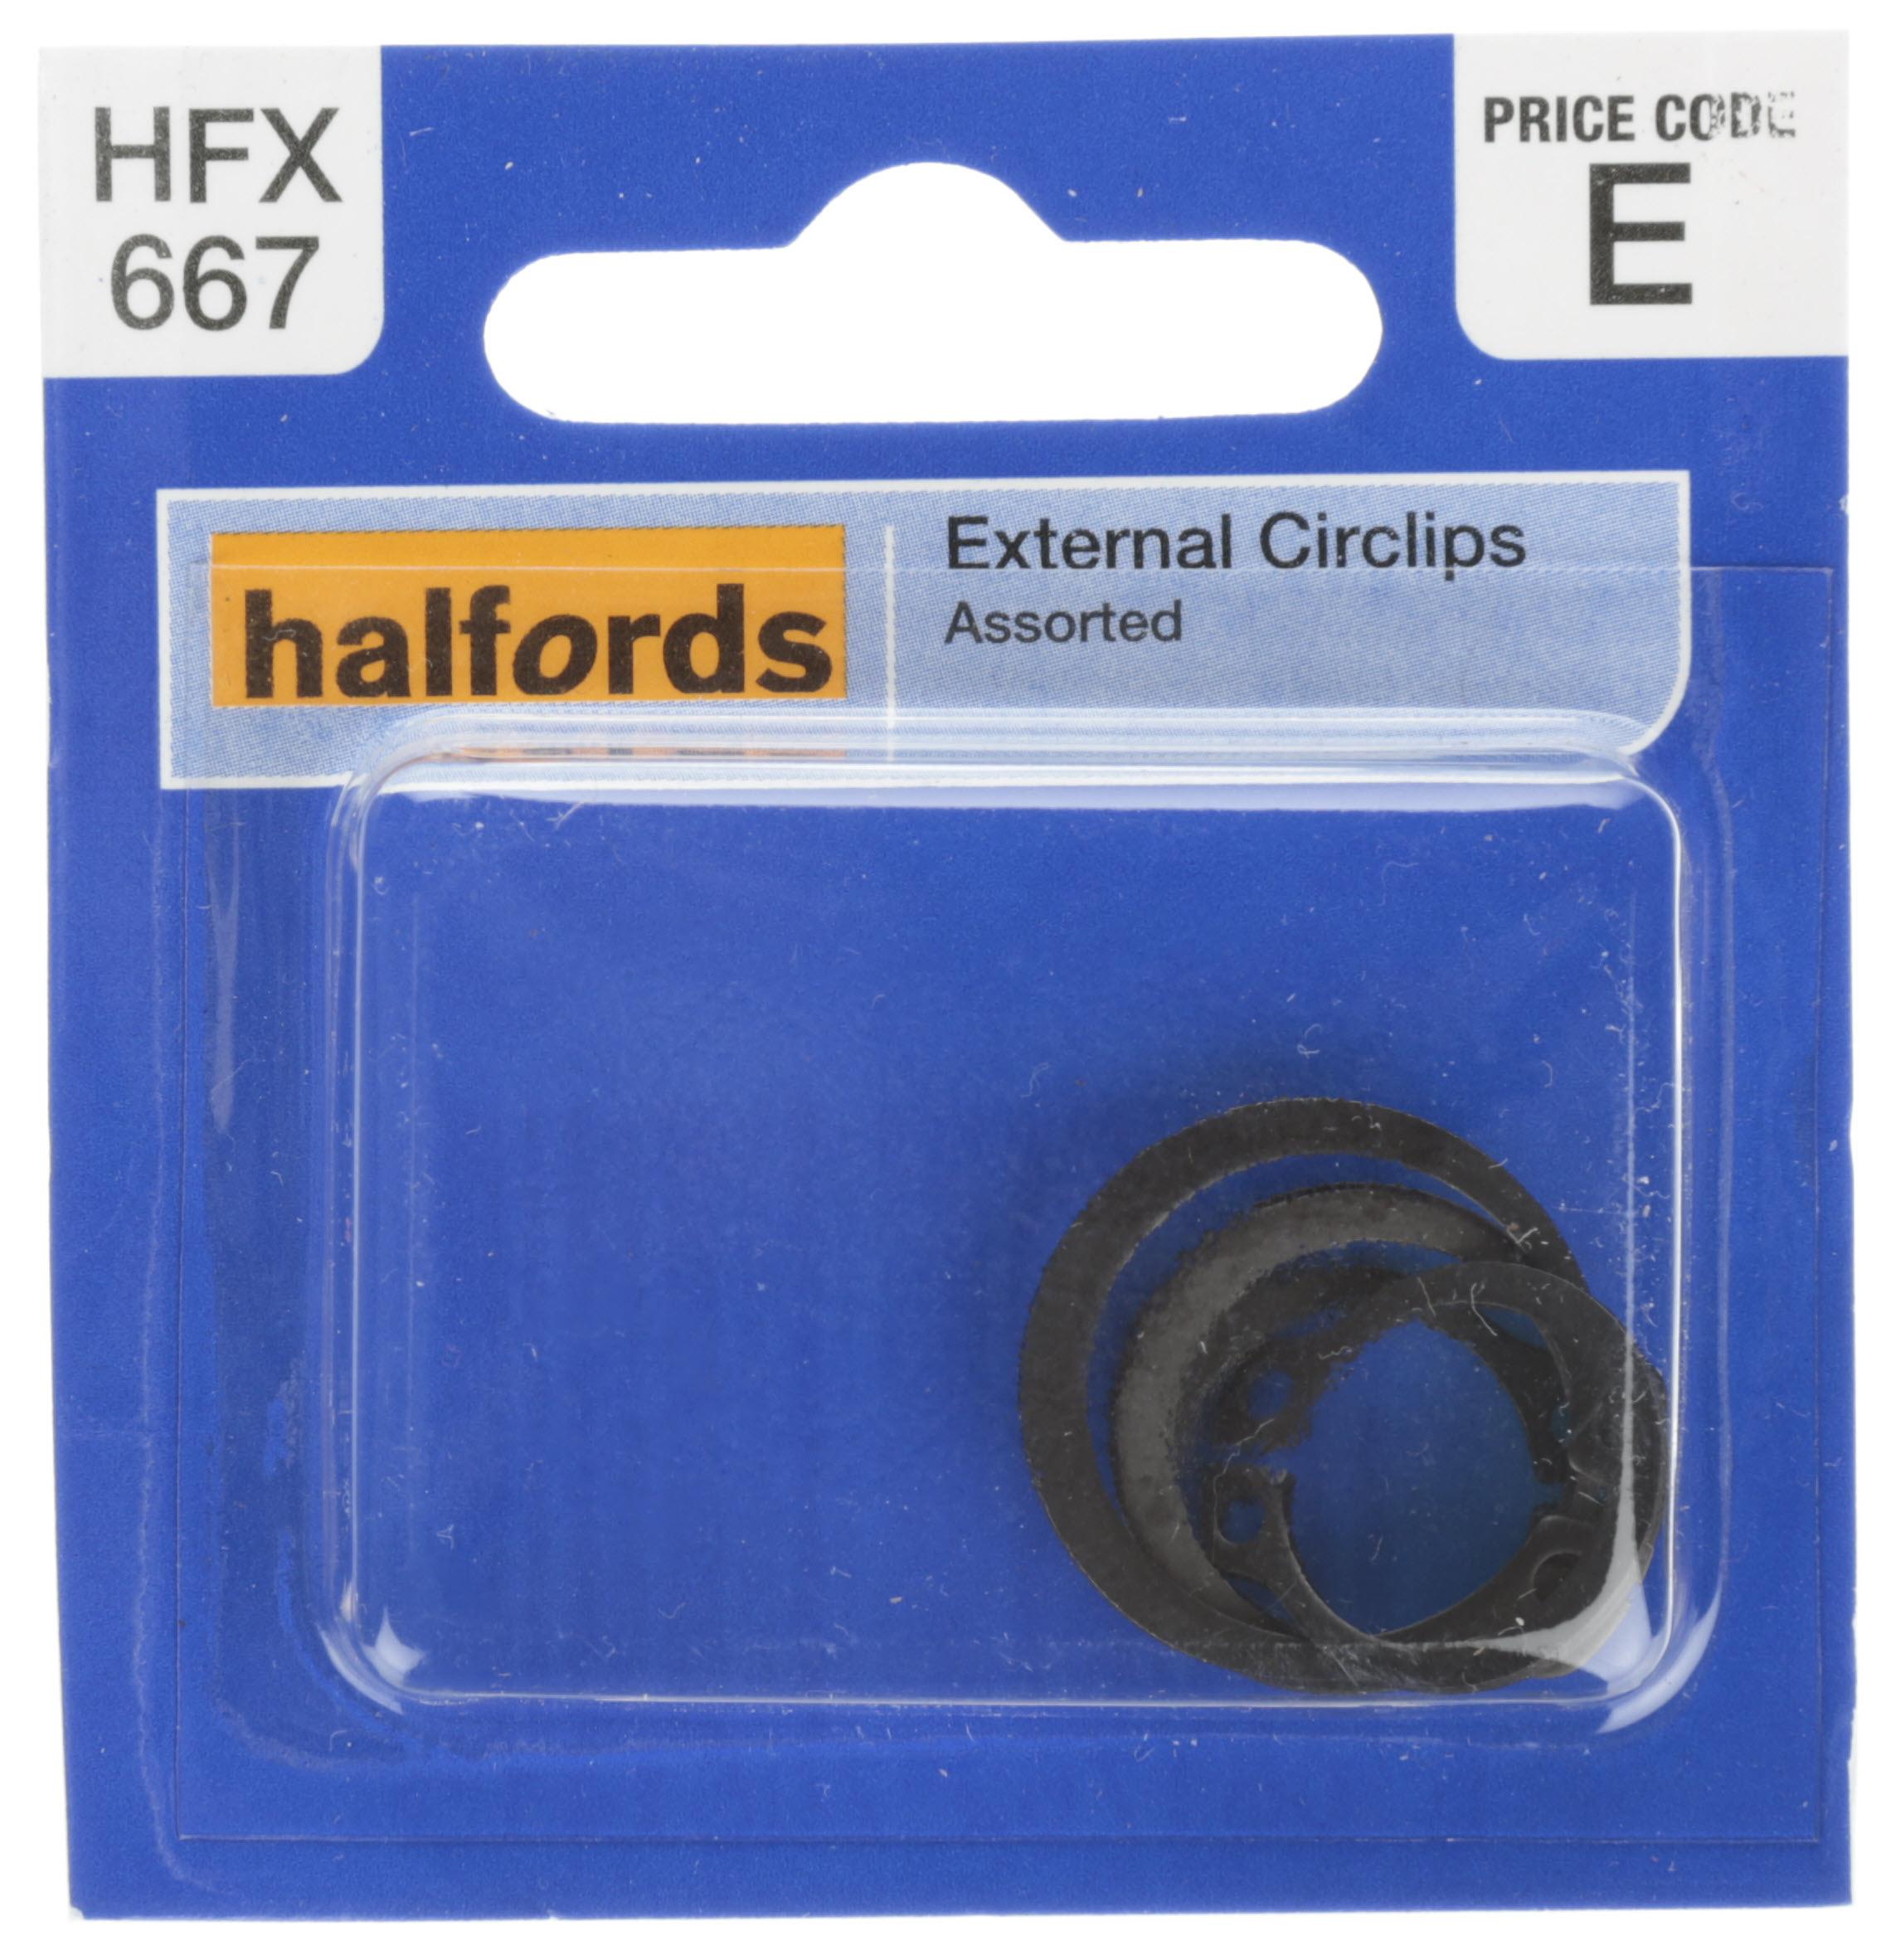 Halfords Assorted External Circlips (Hfx667)